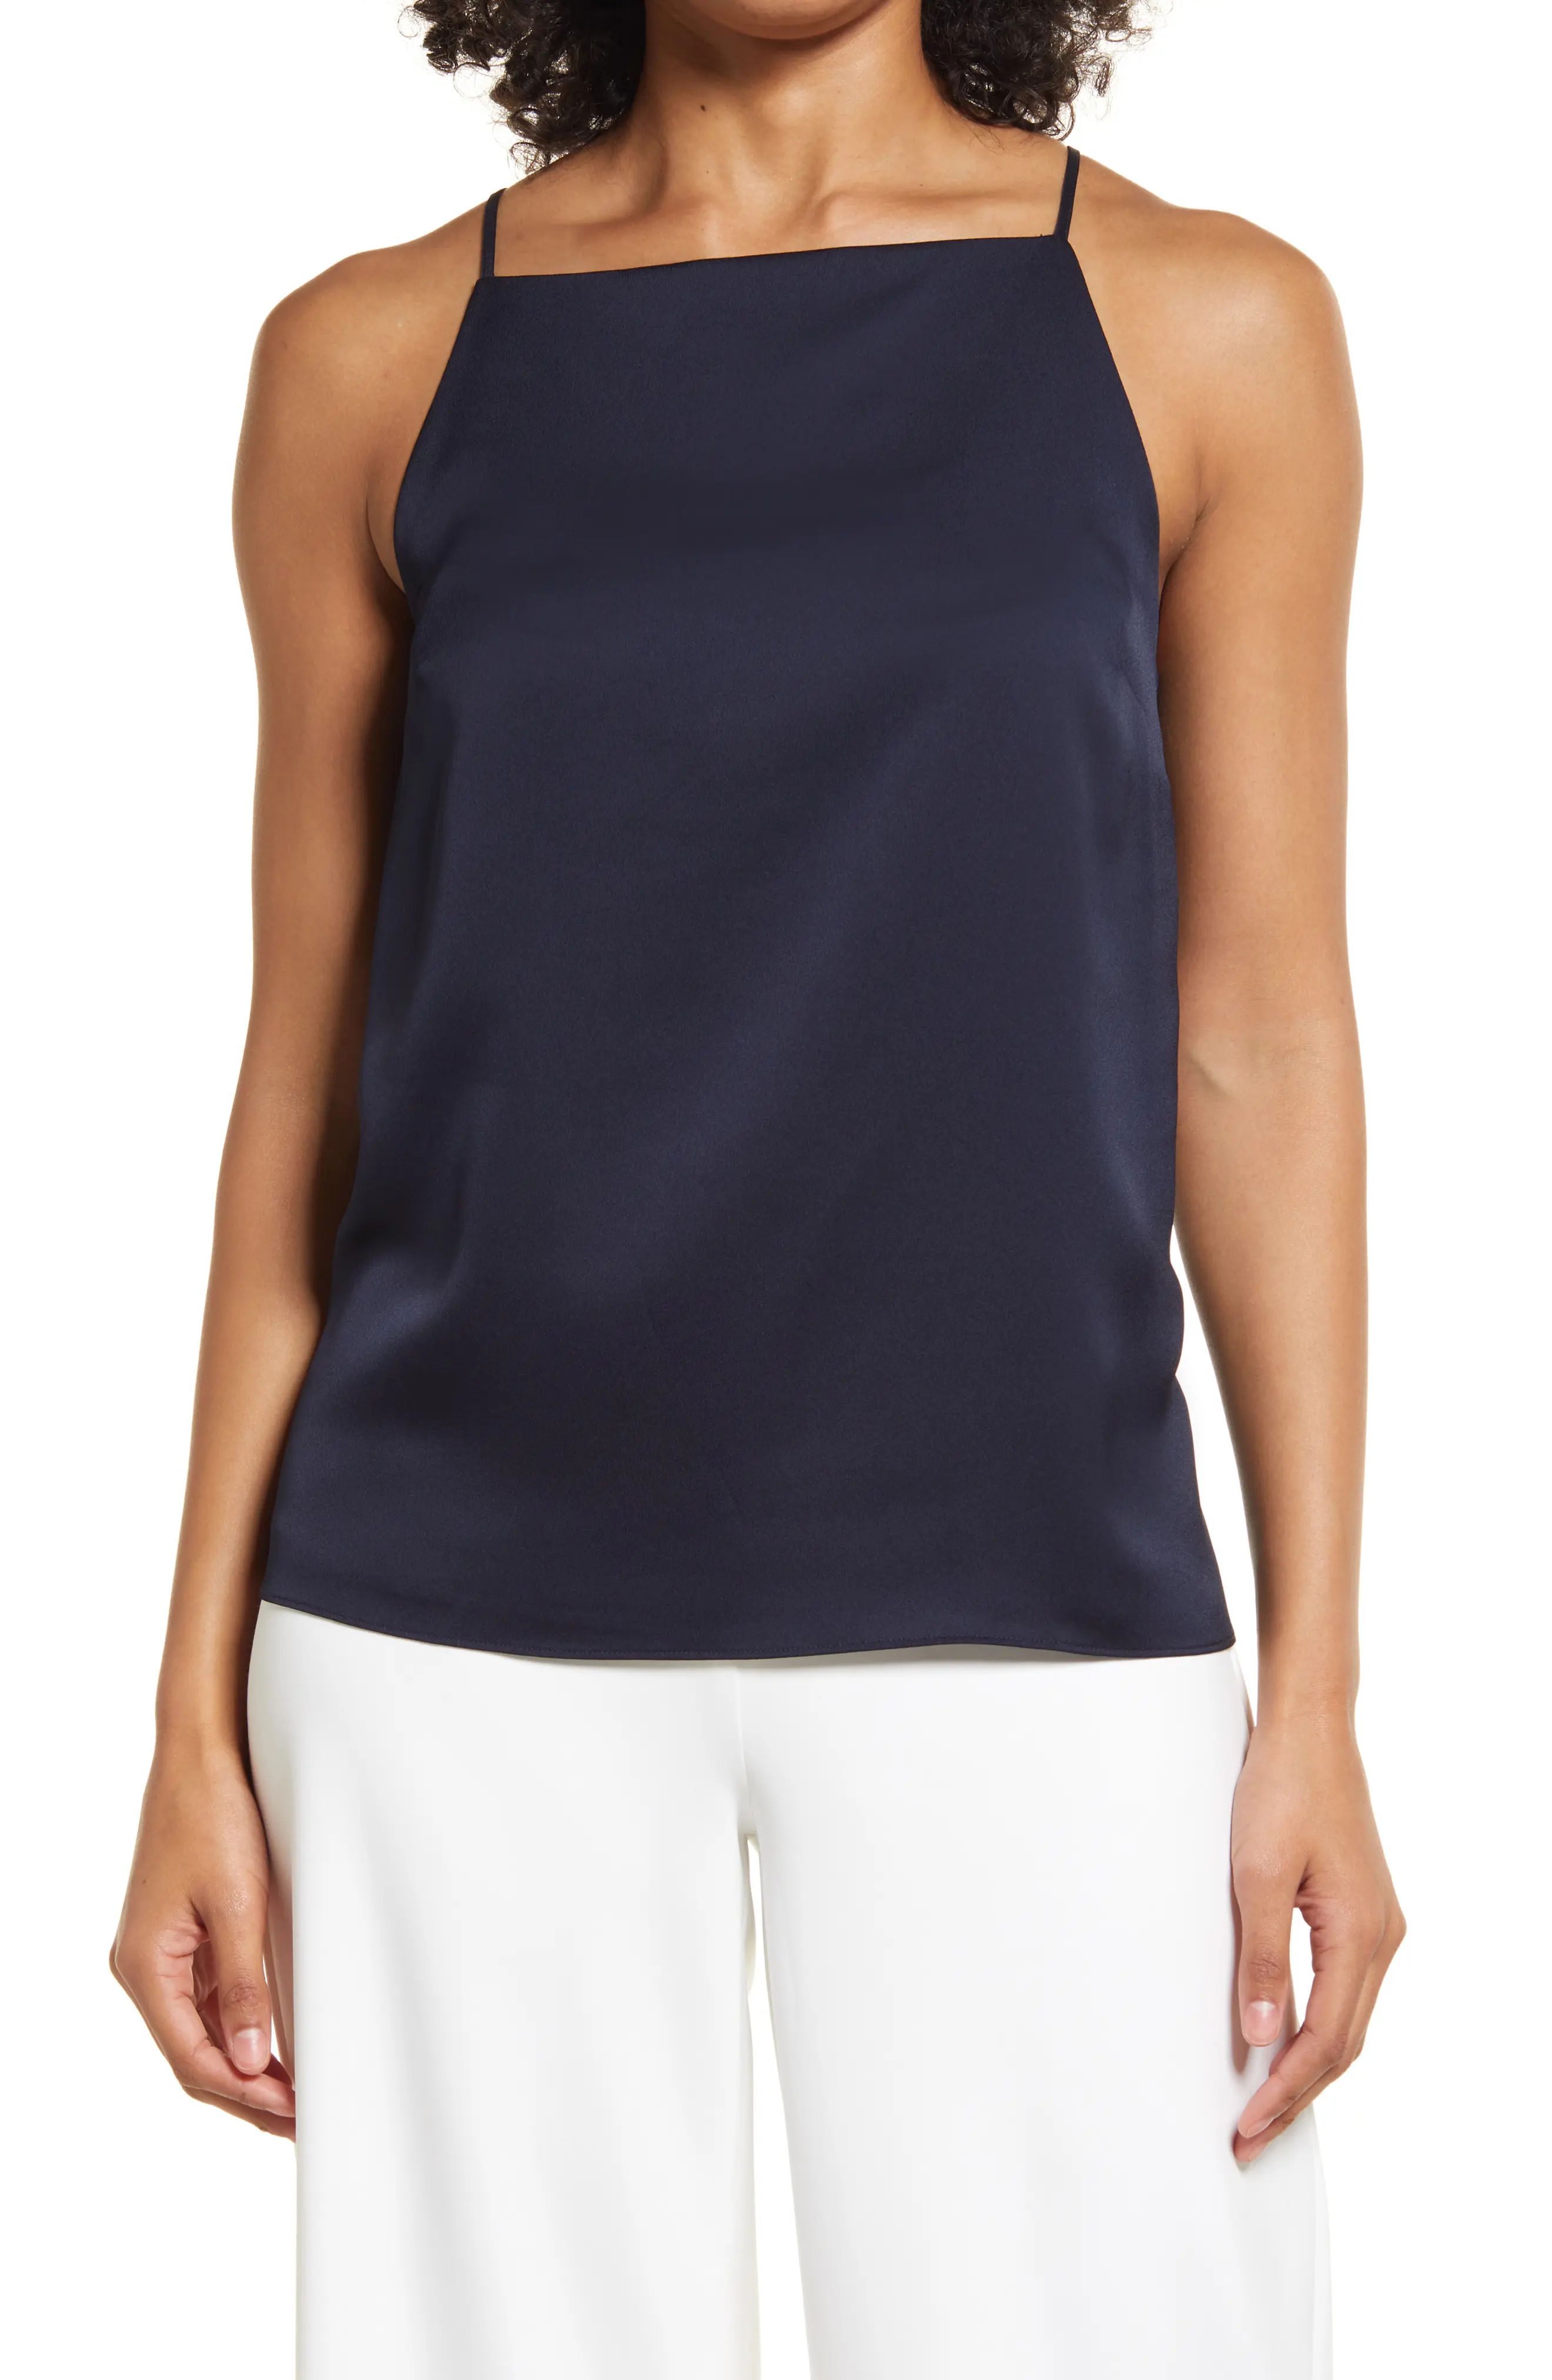 Nordstrom Square Neck Camisole in Navy Night at Nordstrom, Size Small | Nordstrom